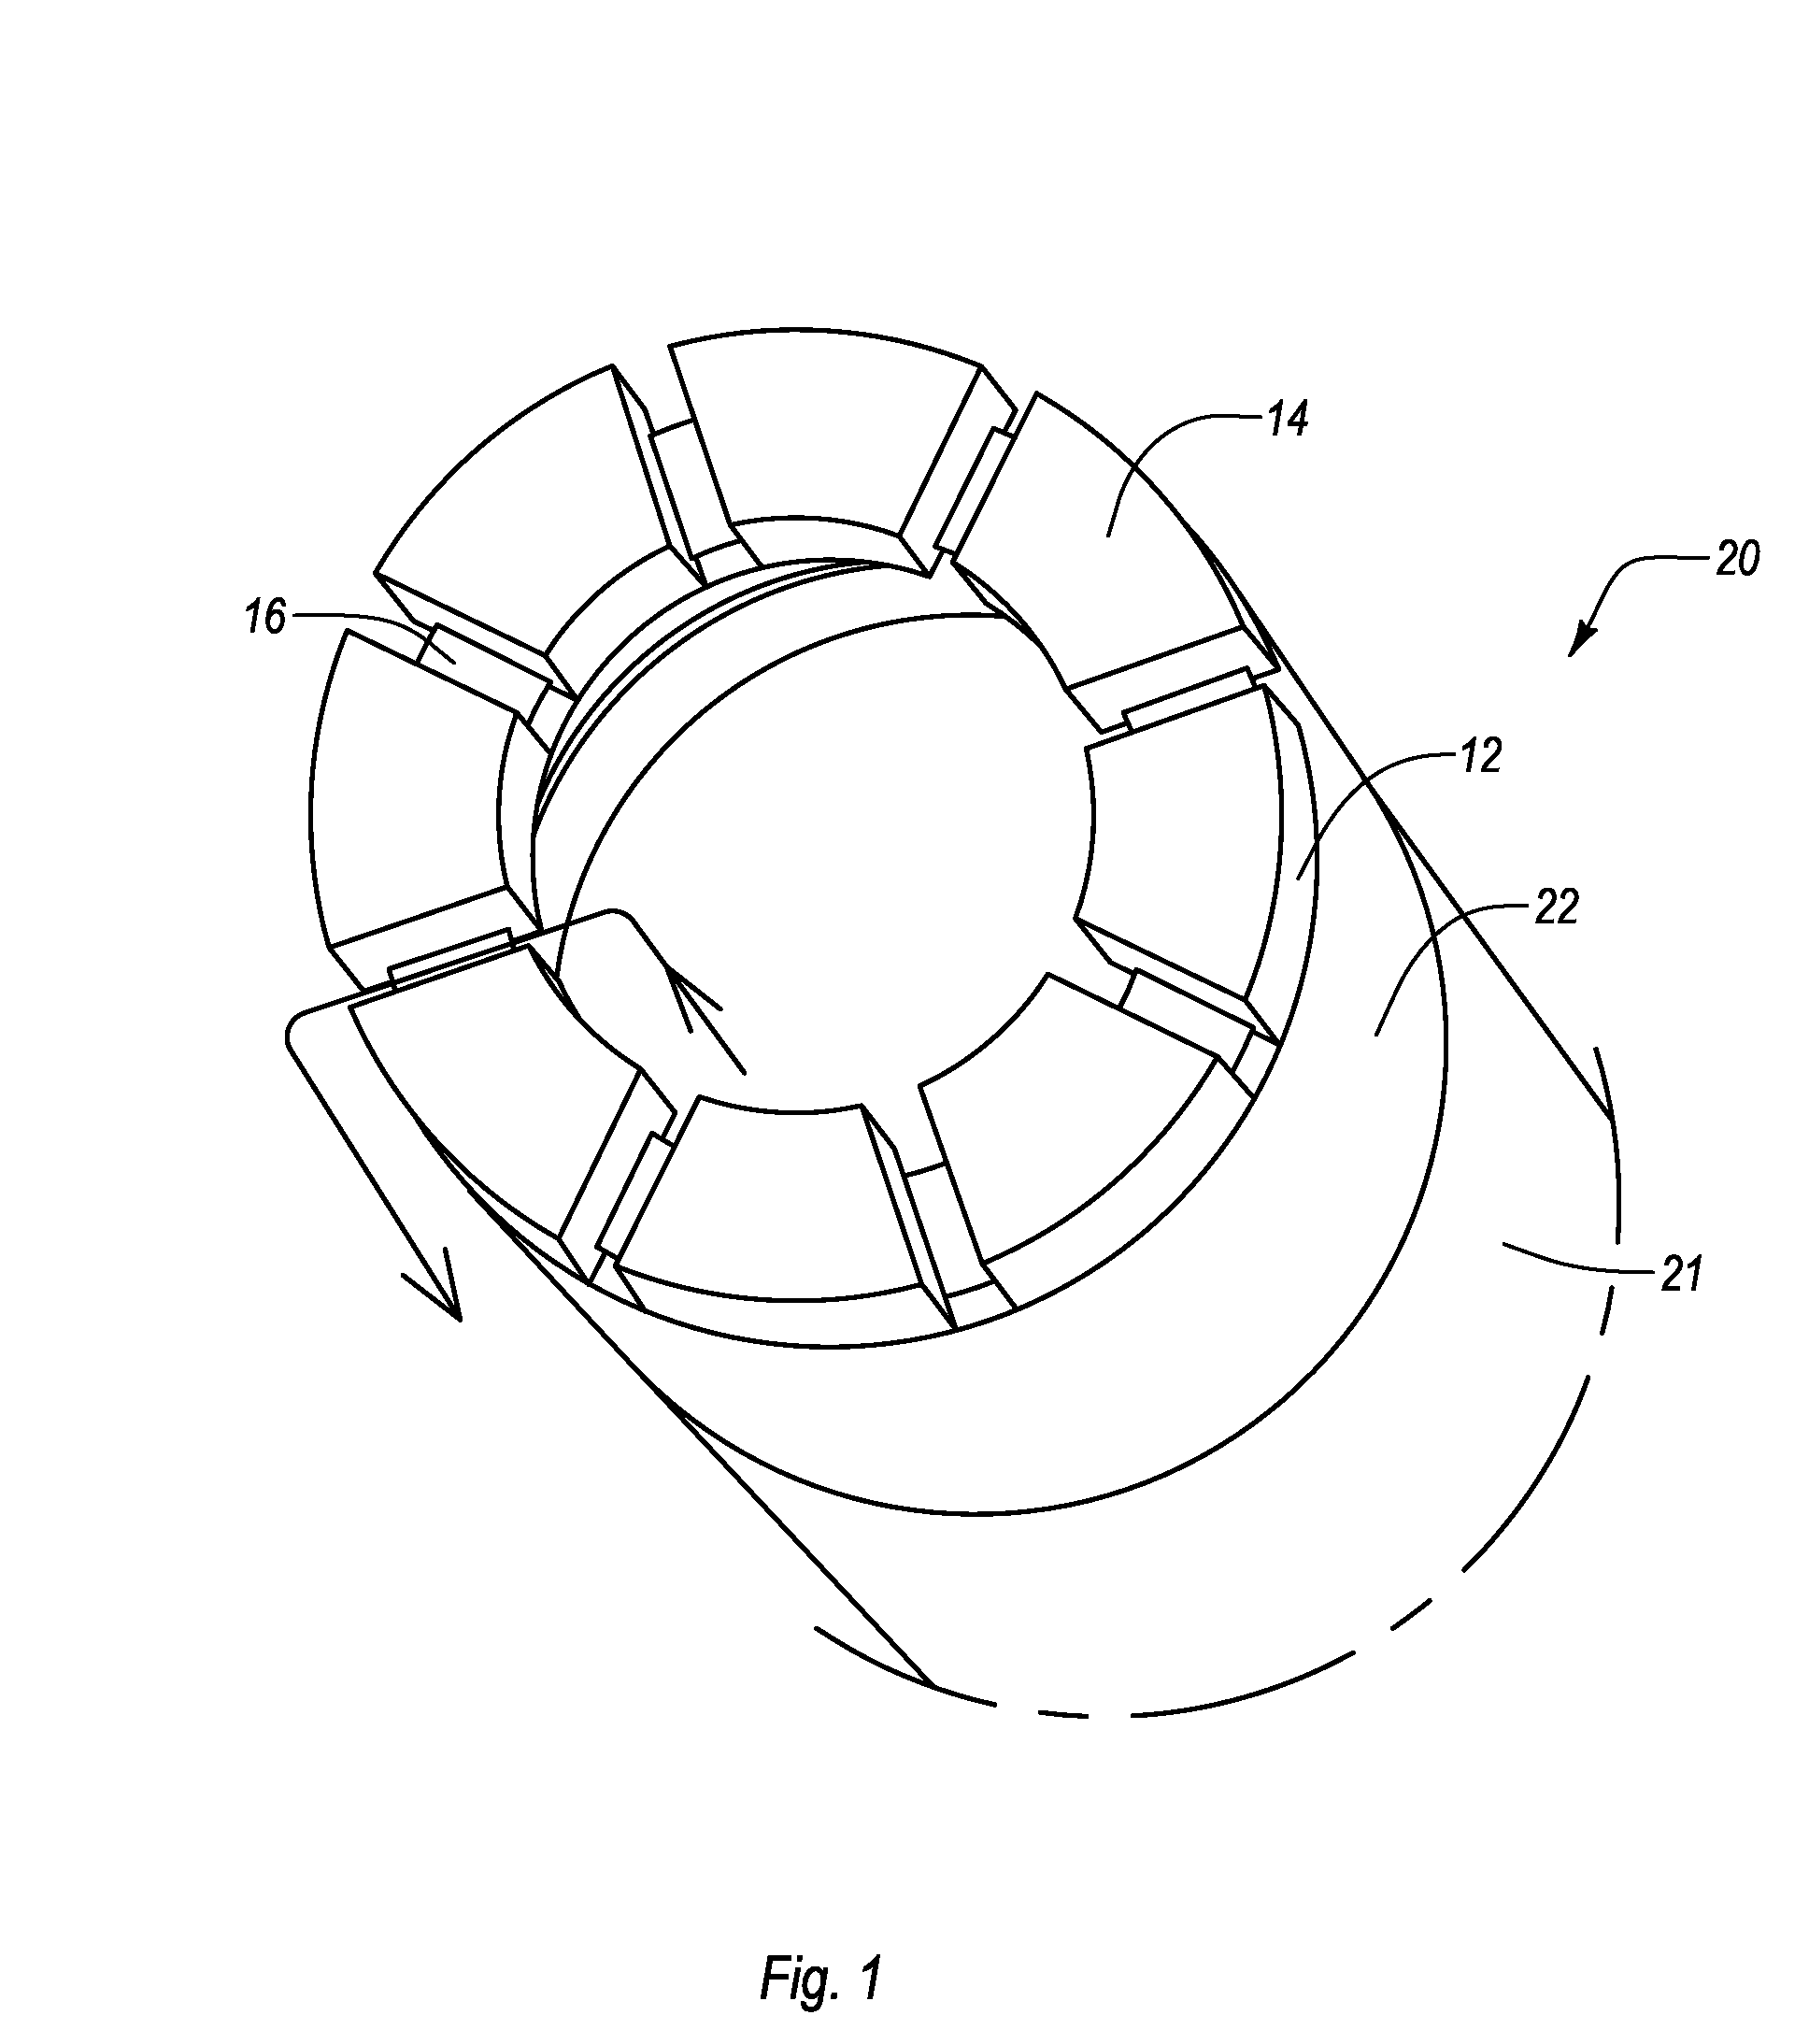 Methods of forming and using fiber-containing diamond-impregnated cutting tools